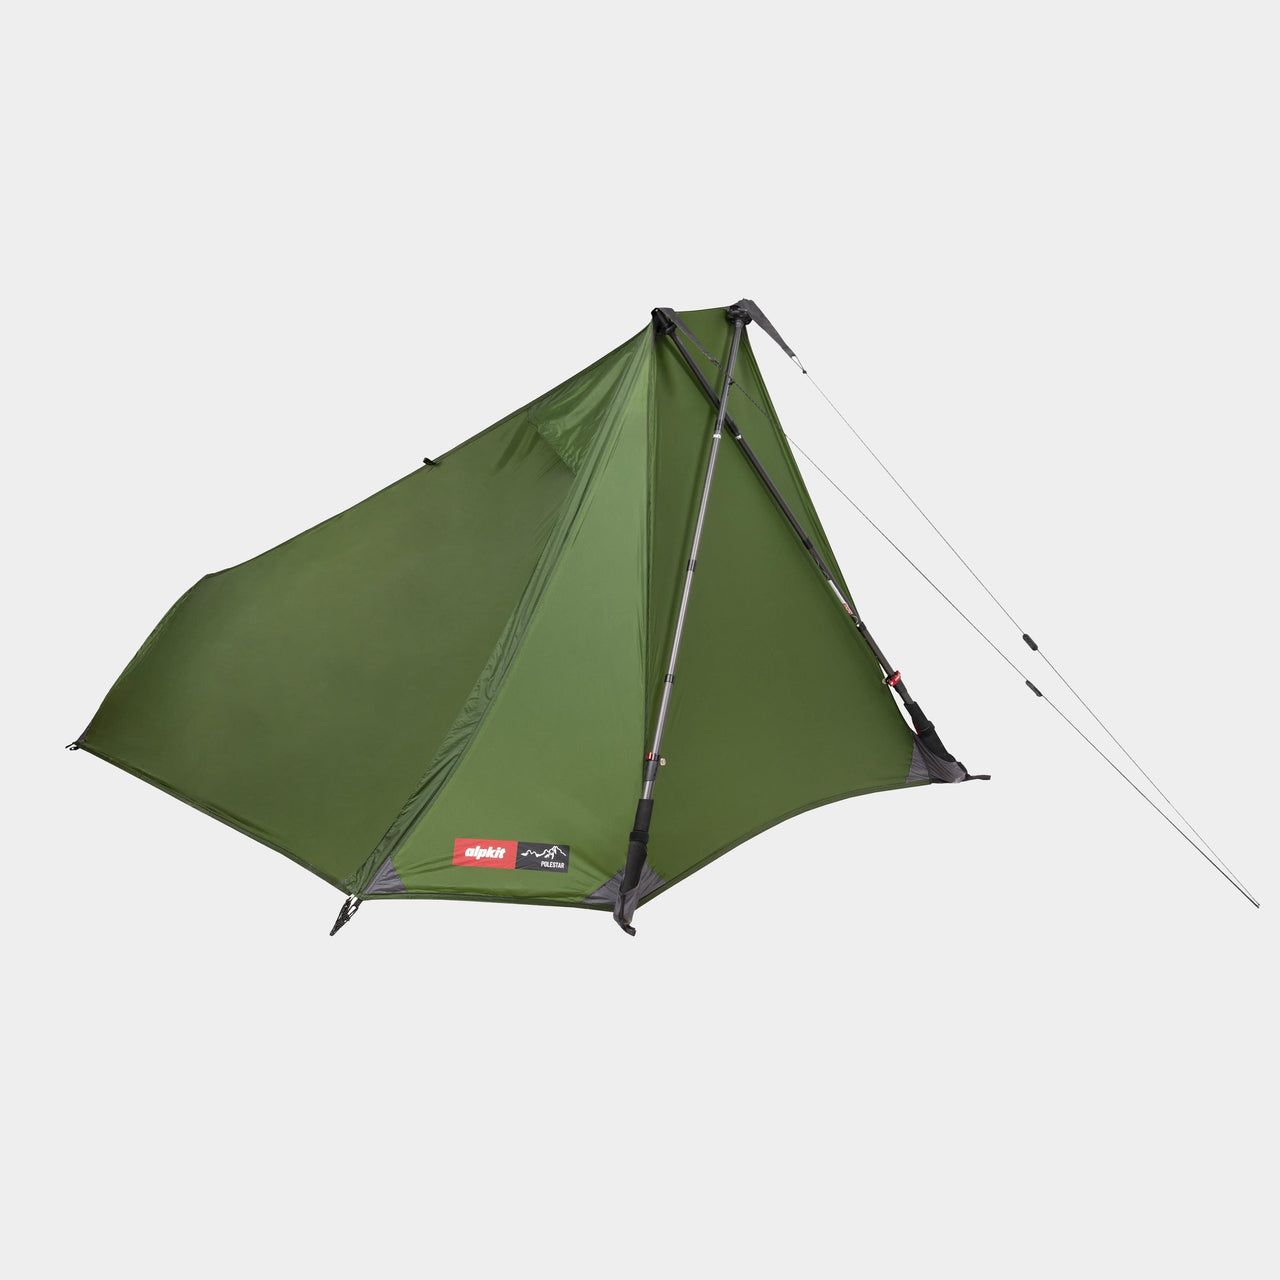 Sprong Betsy Trotwood Verlichting One-person tents: 10 of the best